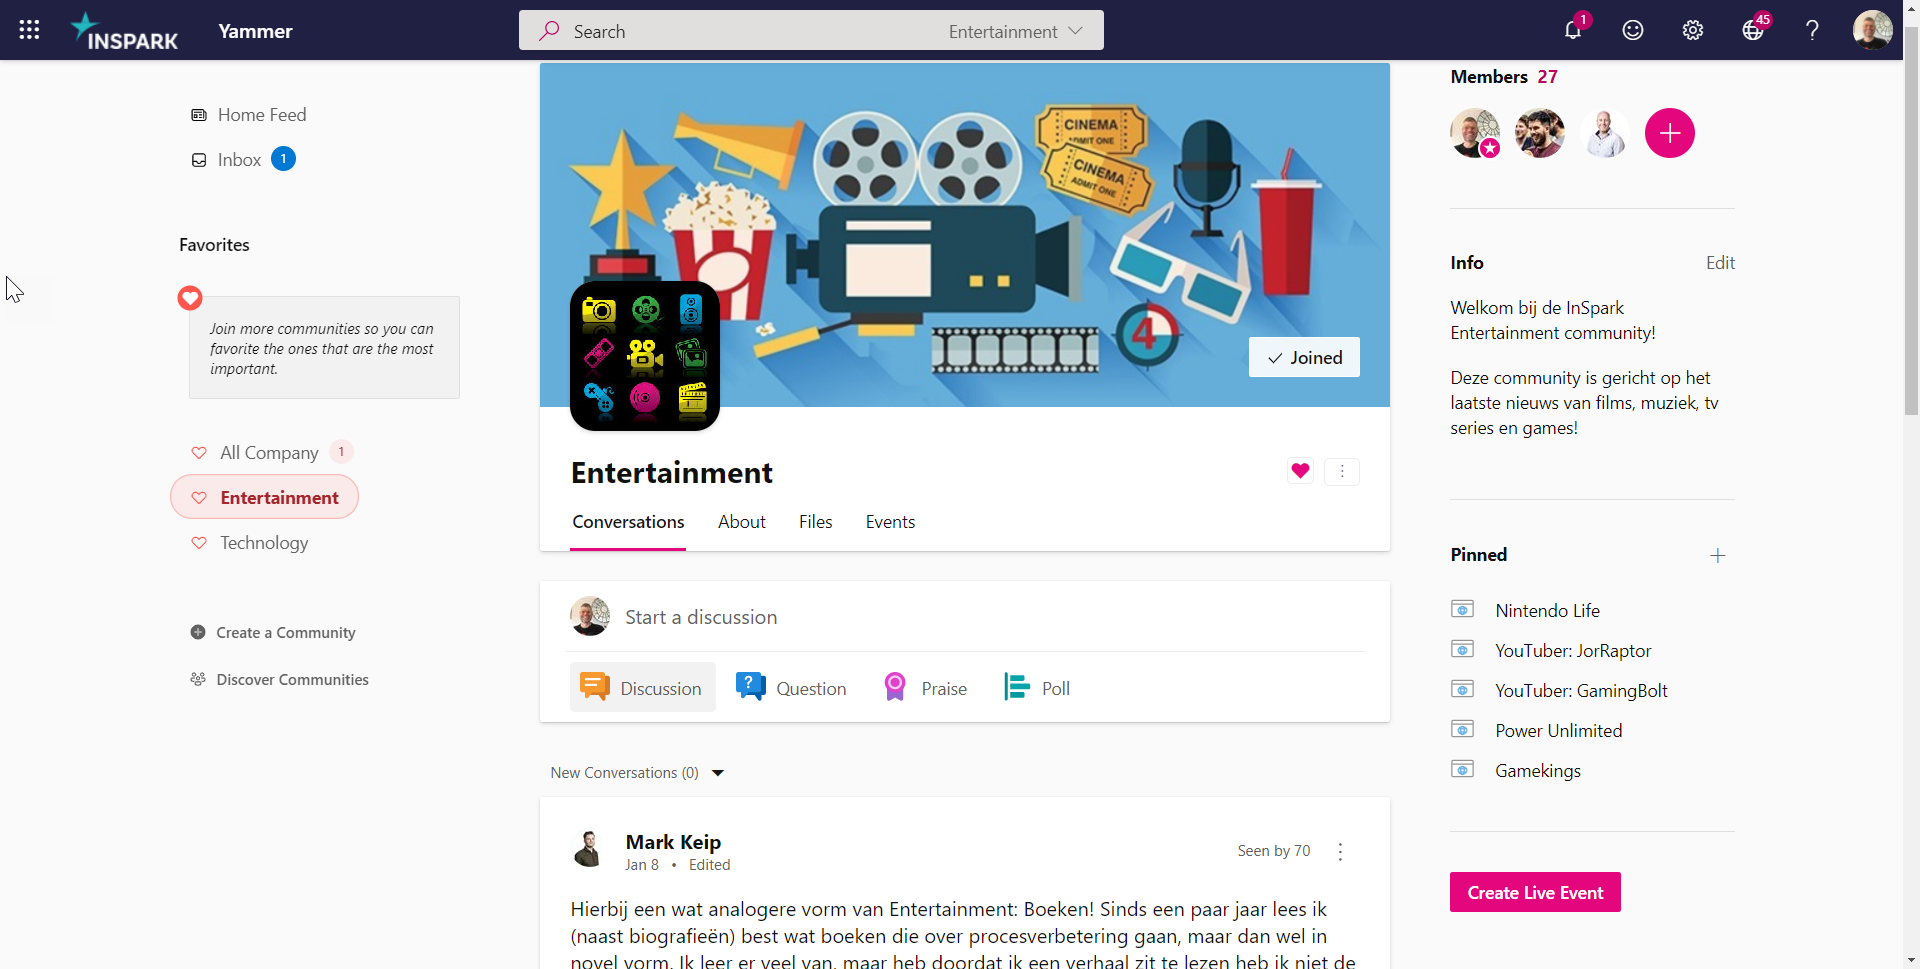 Screenshot of the Yammer entertainment community at Yammer.